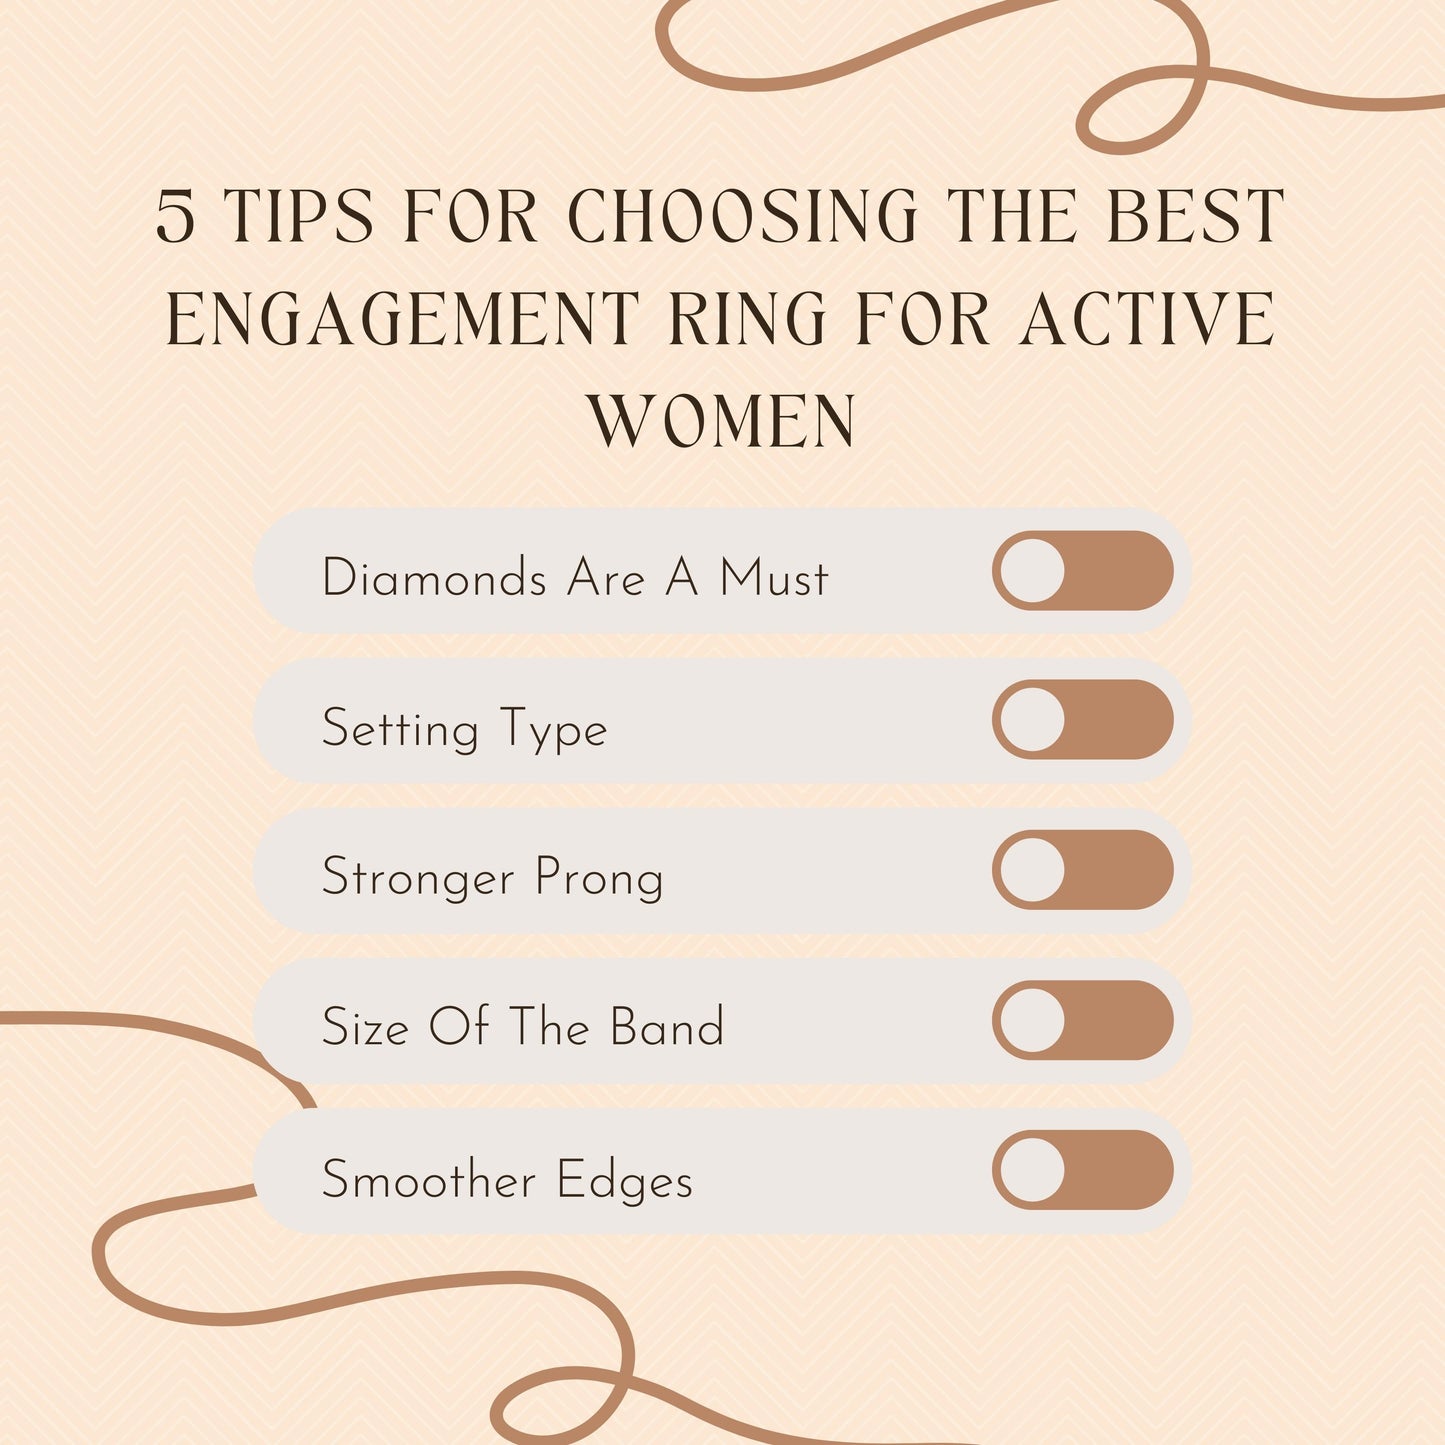 5 Tips for Choosing the Best Engagement Ring for Active Women